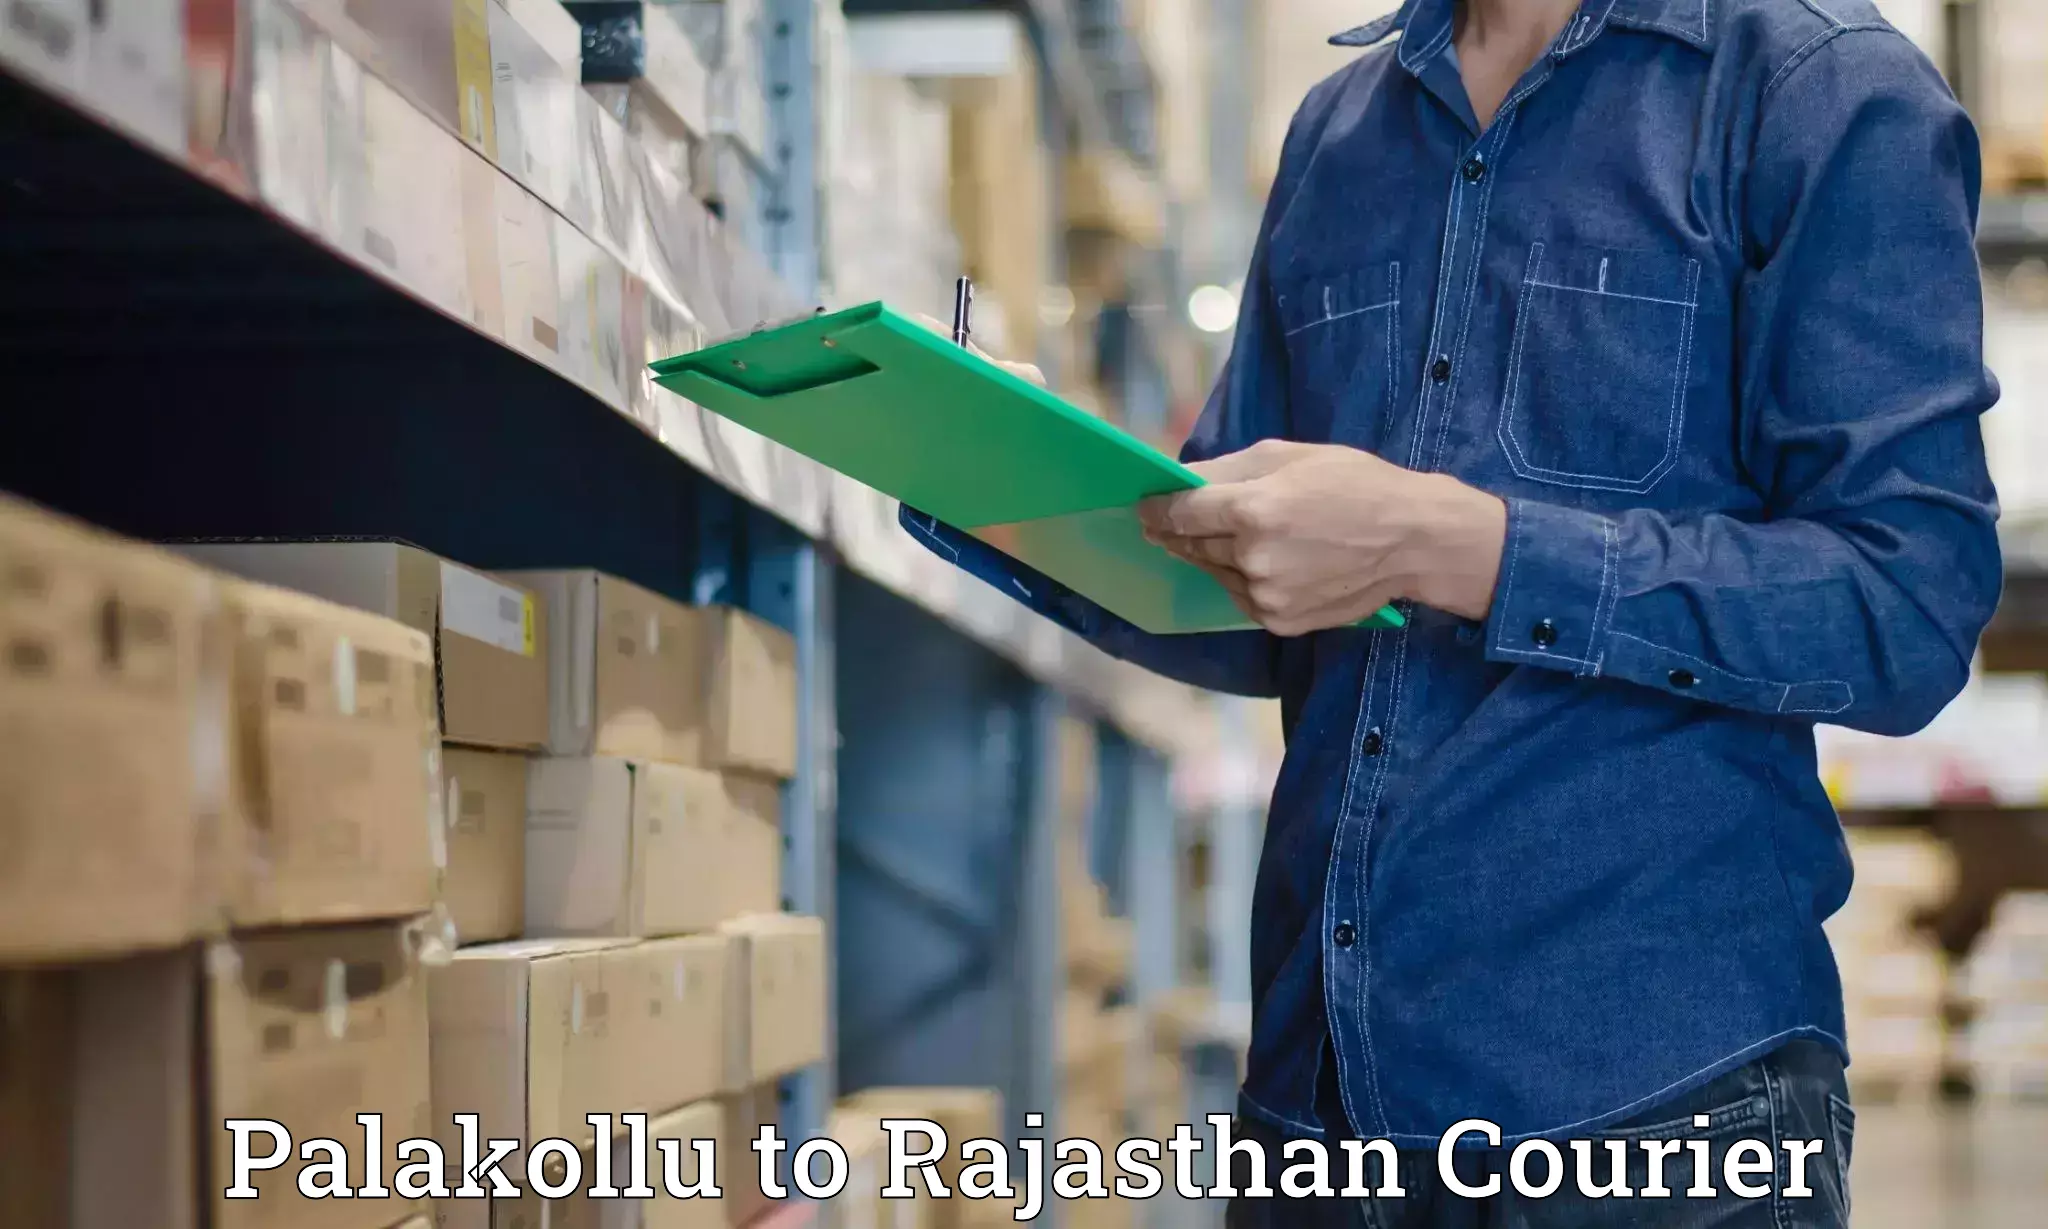 On-call courier service Palakollu to Rajasthan